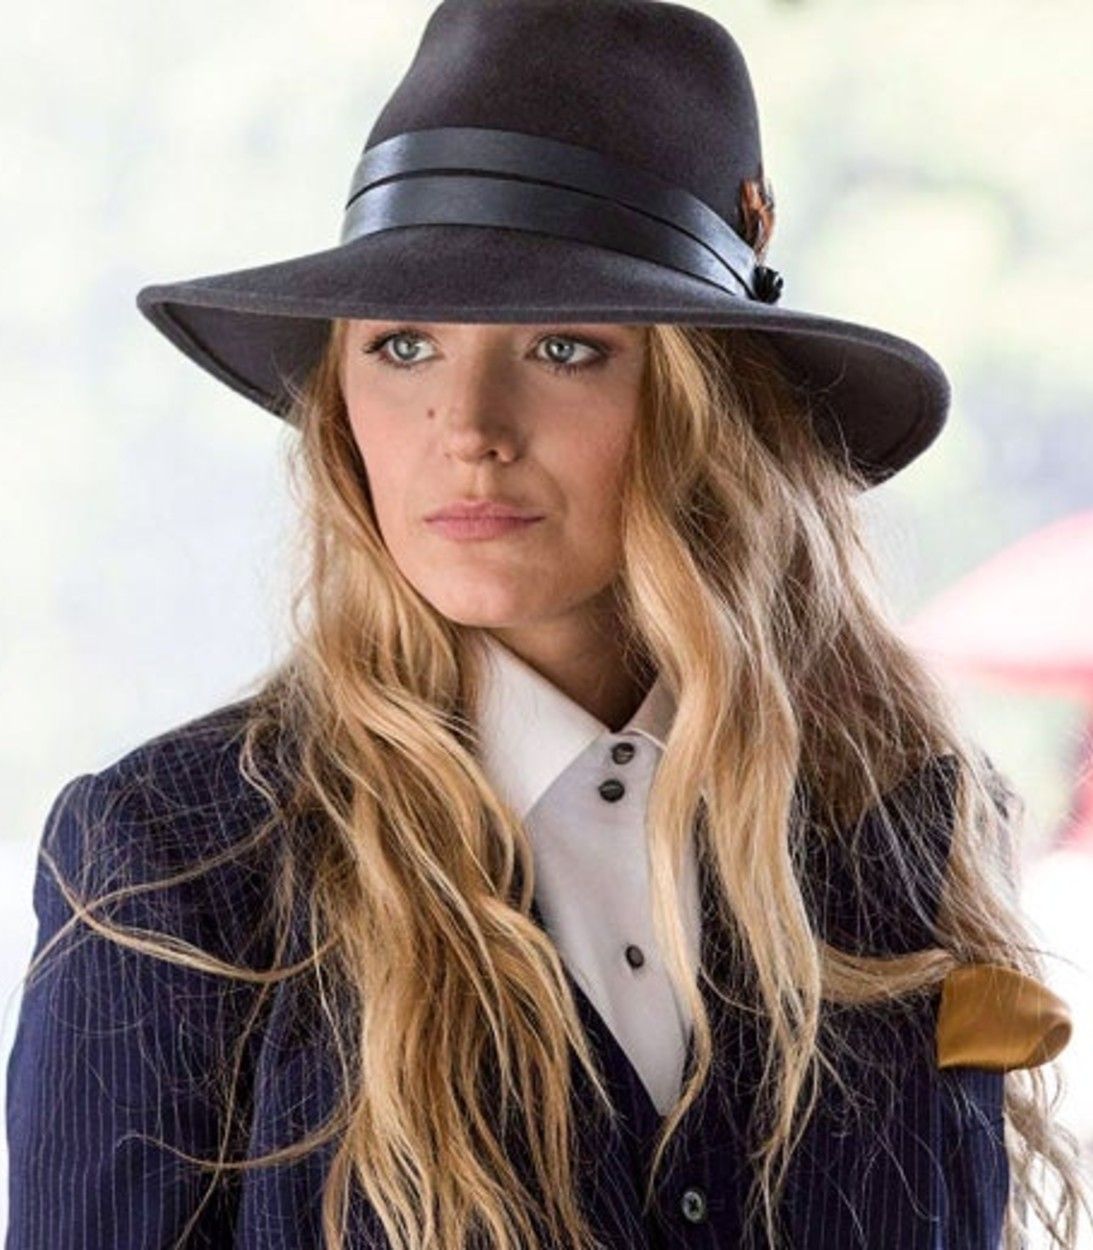 Blake Lively in A Simple Favor Vertical